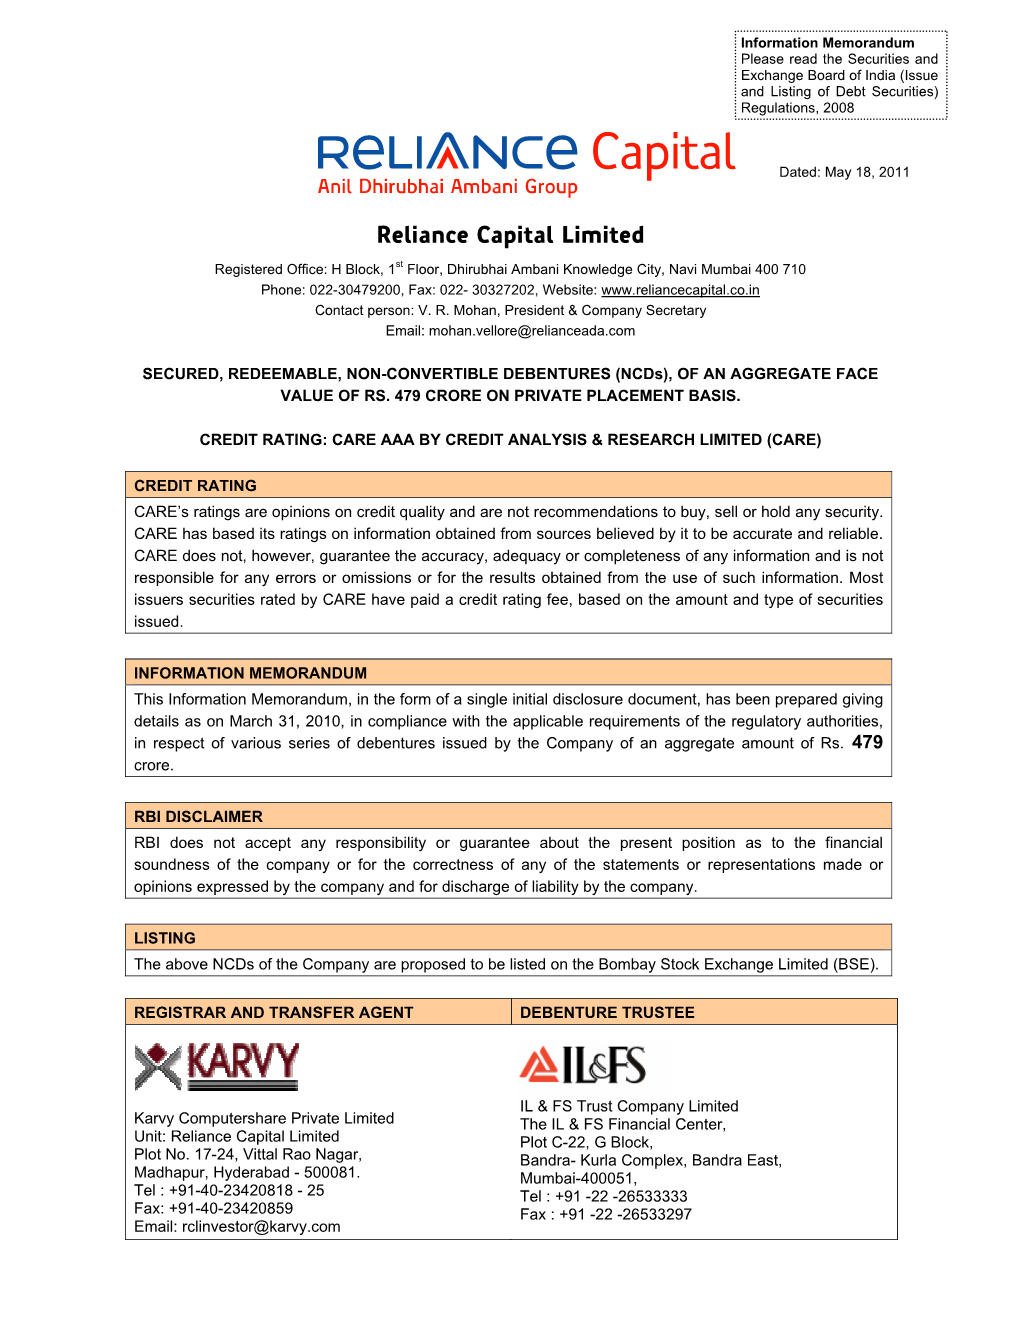 Reliance Capital Limited